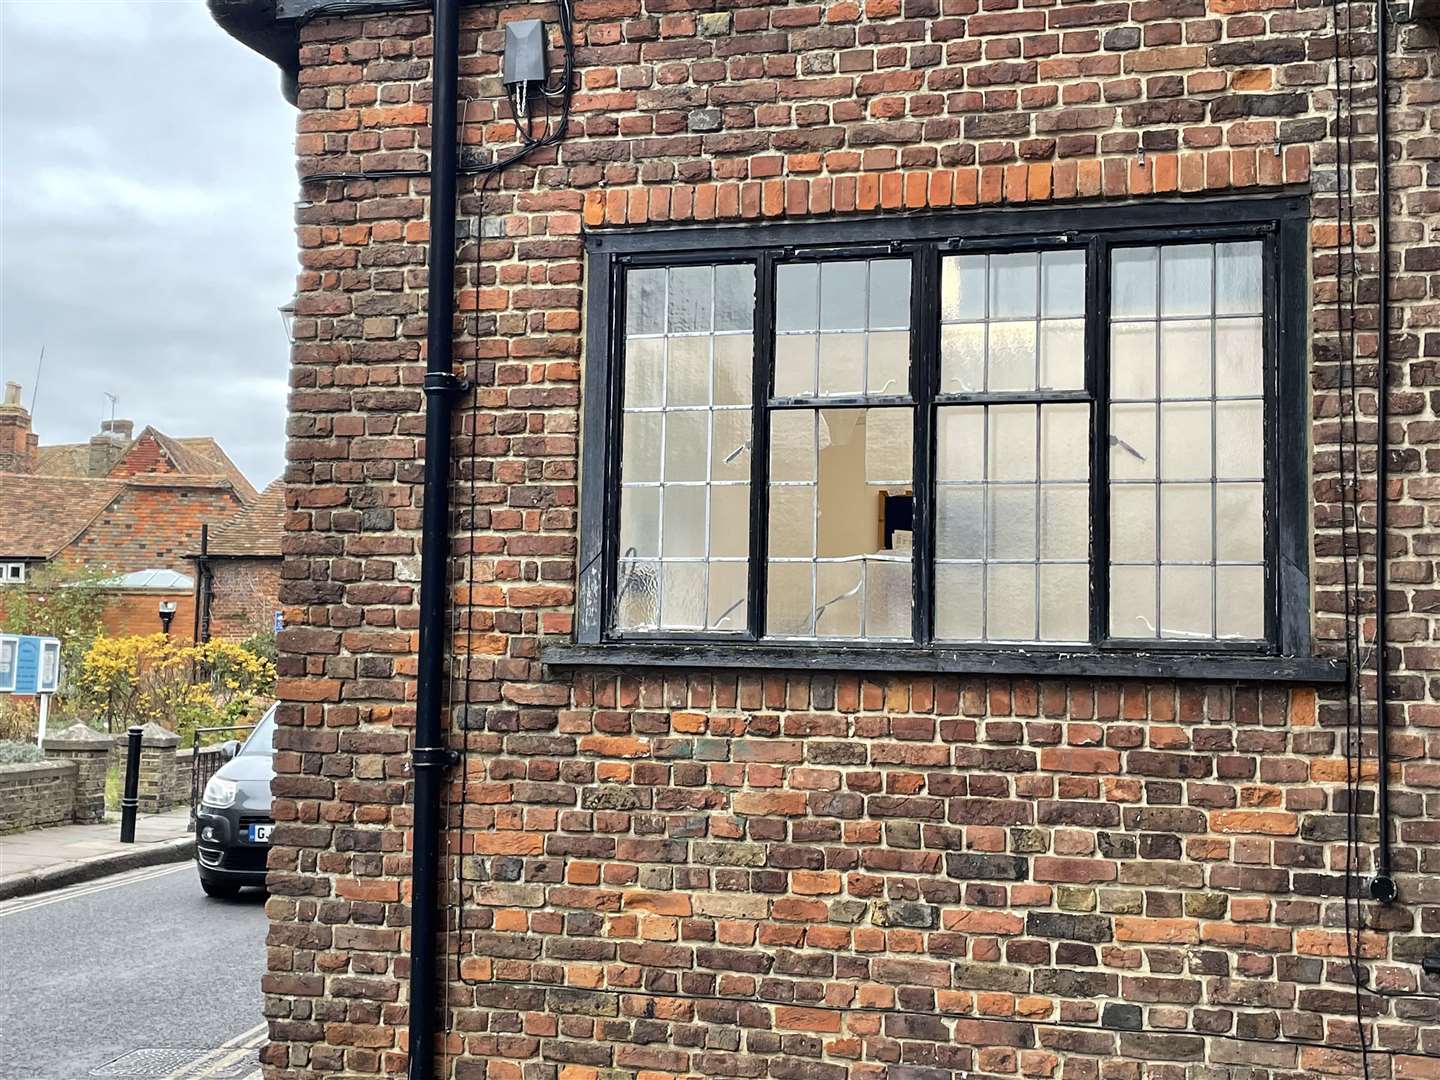 A broken window at Sandwich Guildhall, pictured on November 16